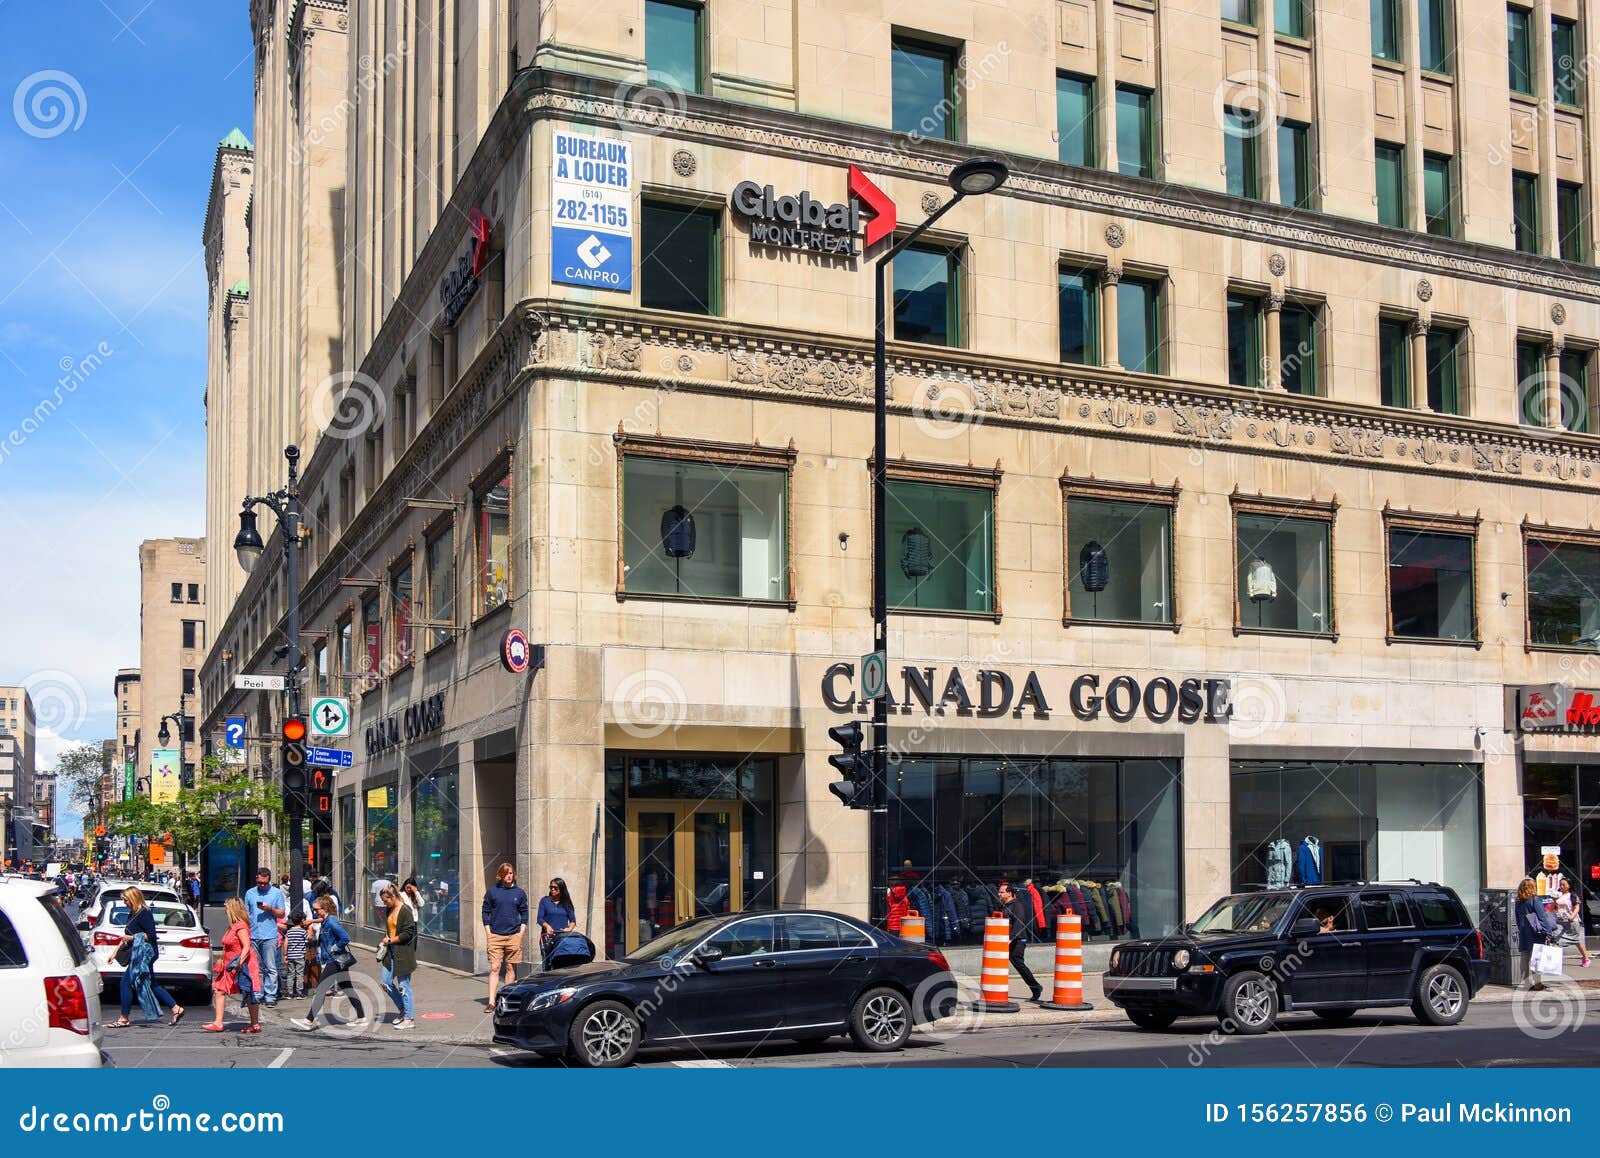 Canada Goose Store in Montreal, Canada Editorial Photo - Image of ...